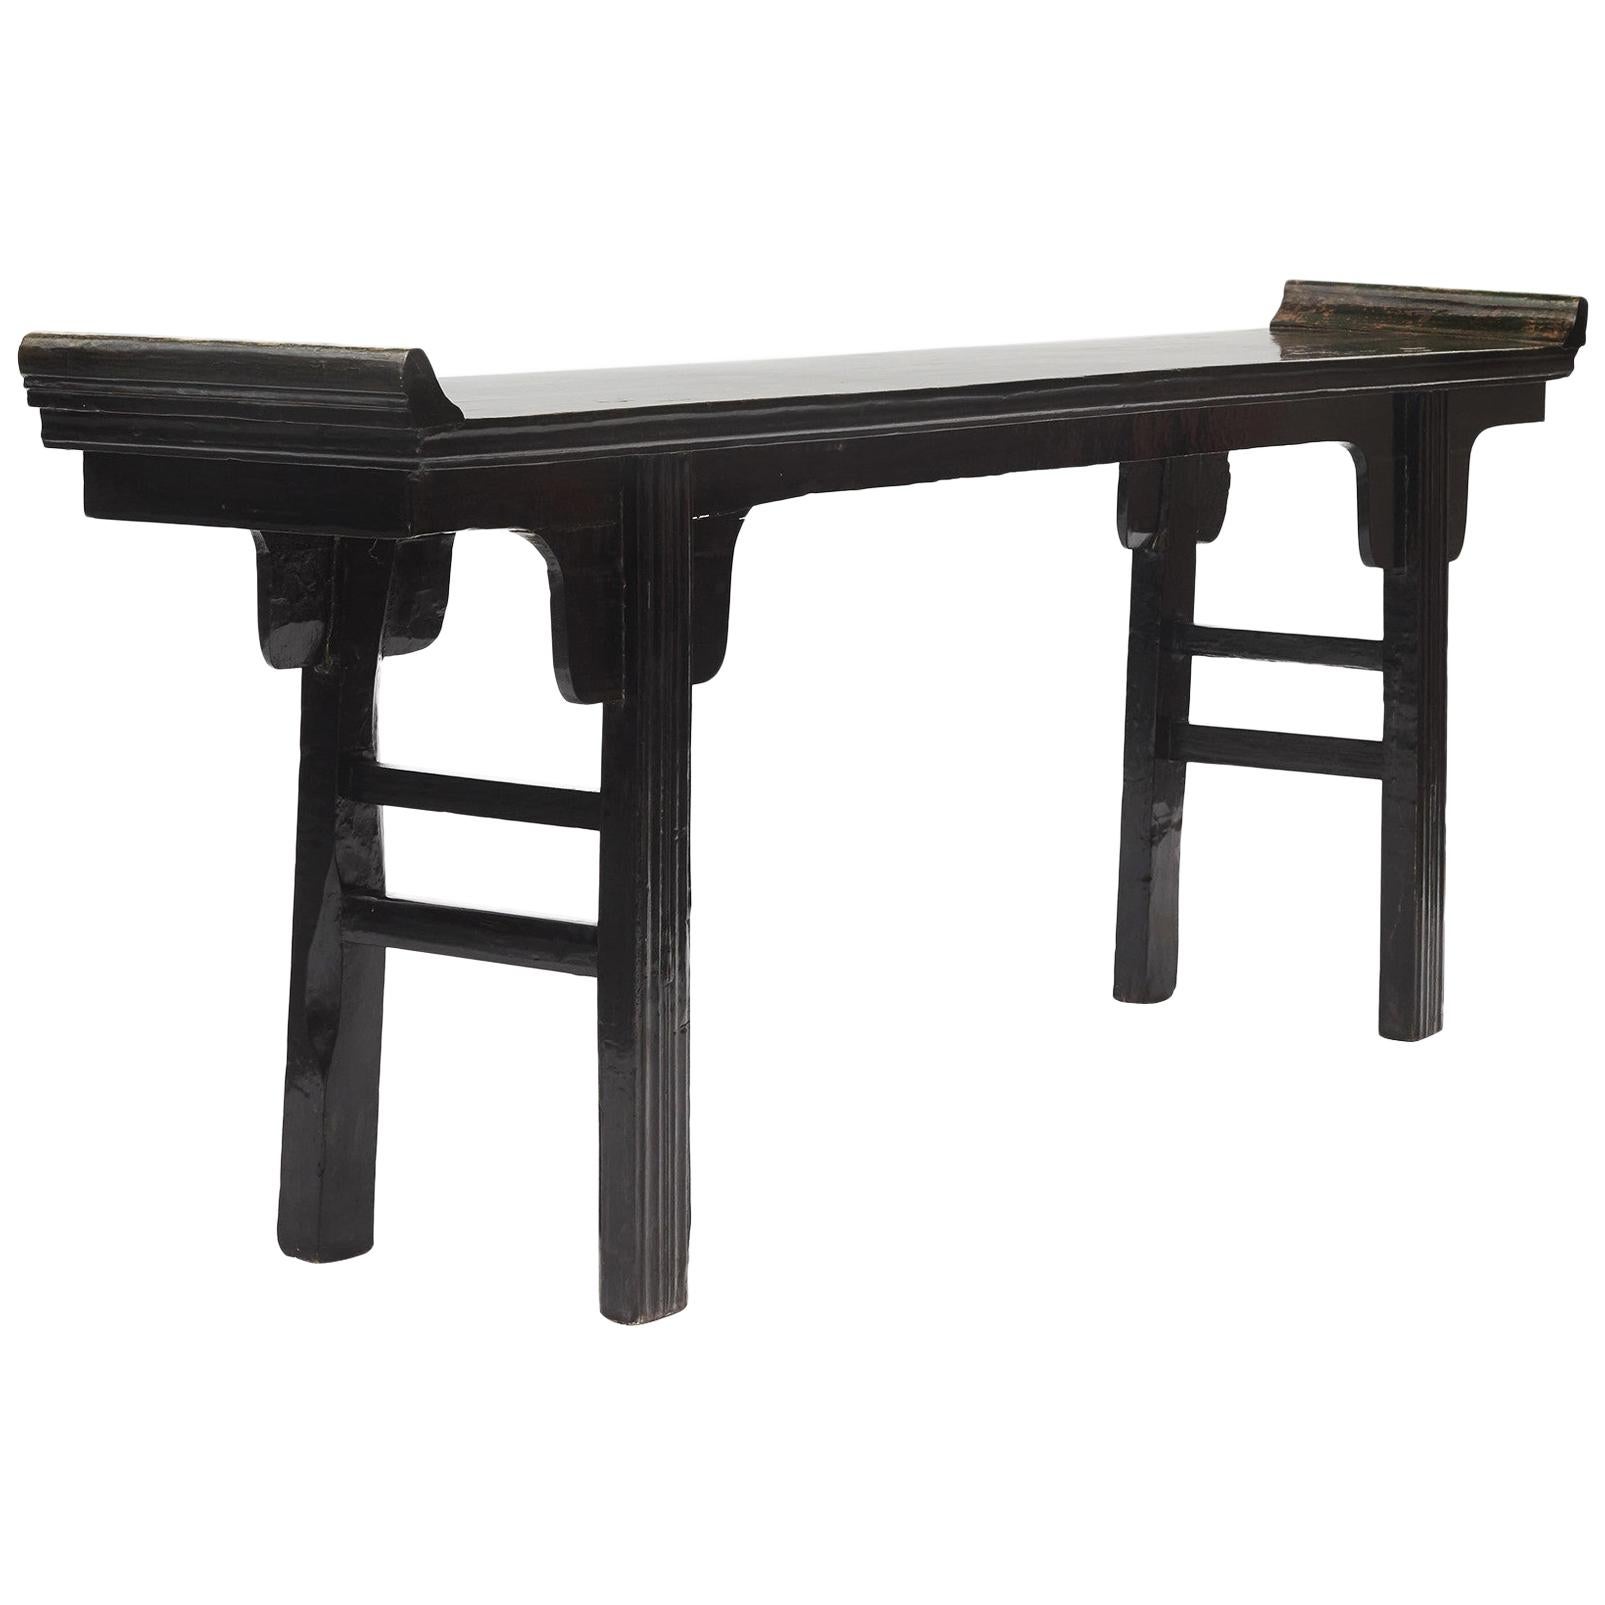 Black & Green Lacquer Consol Table, Shandong, 1830-1840 For Sale